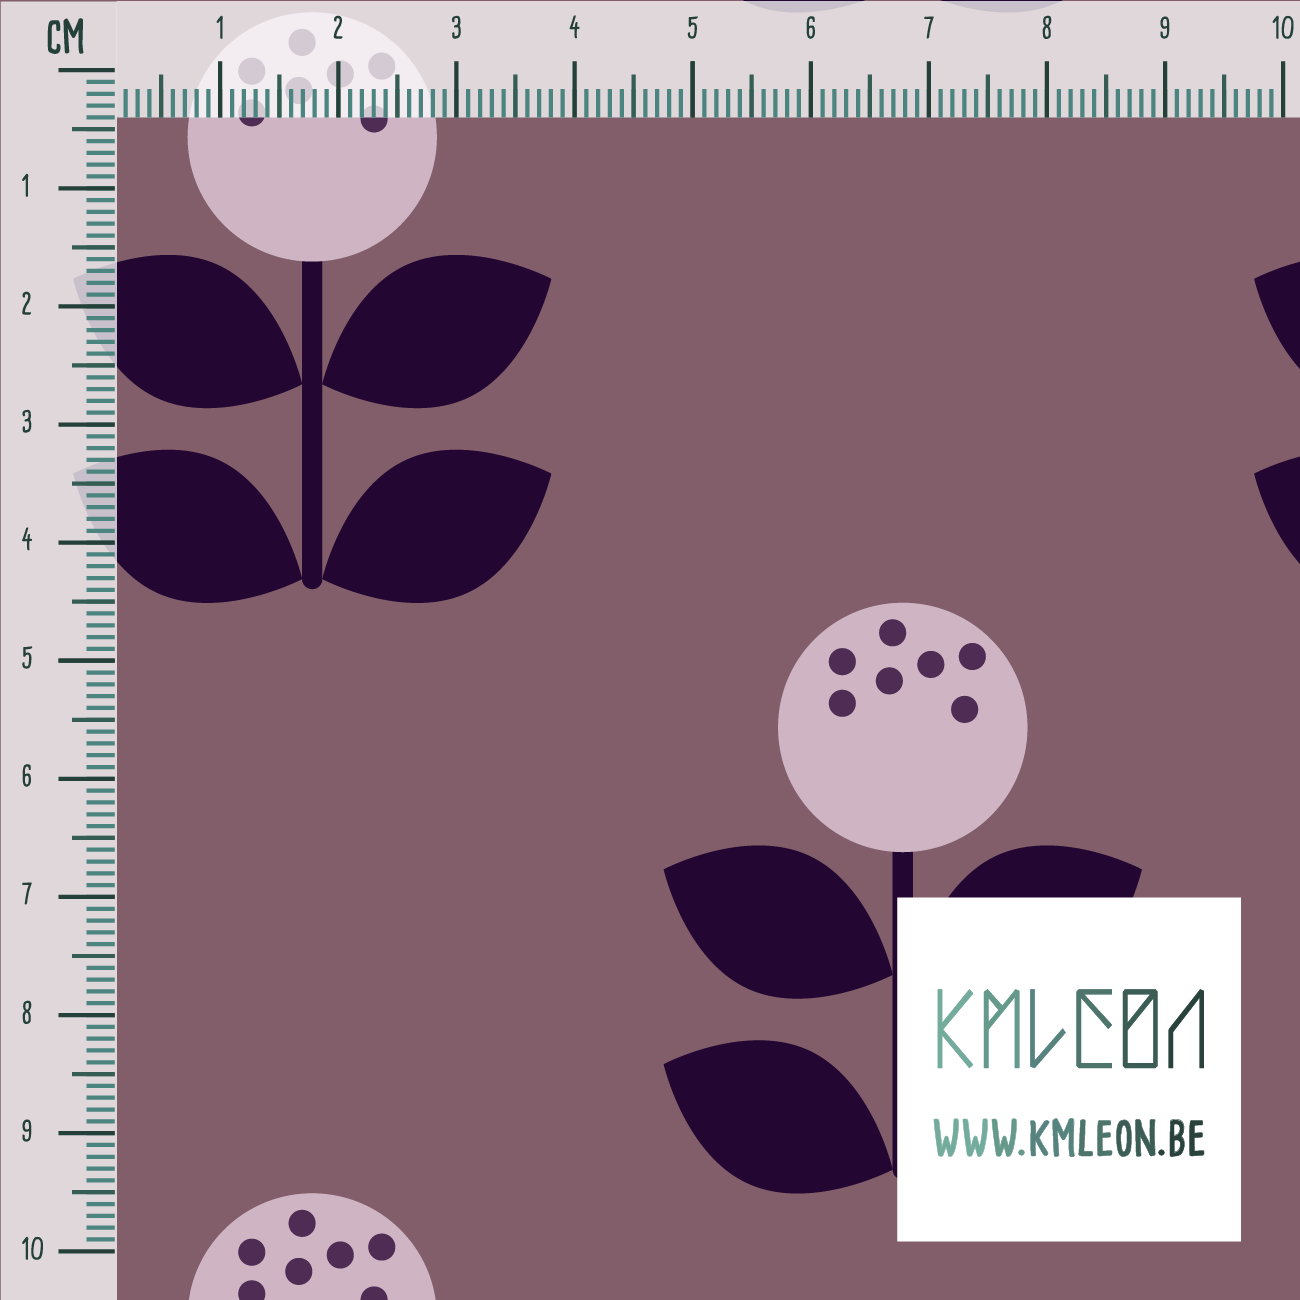 Large pink and purple flowers fabric